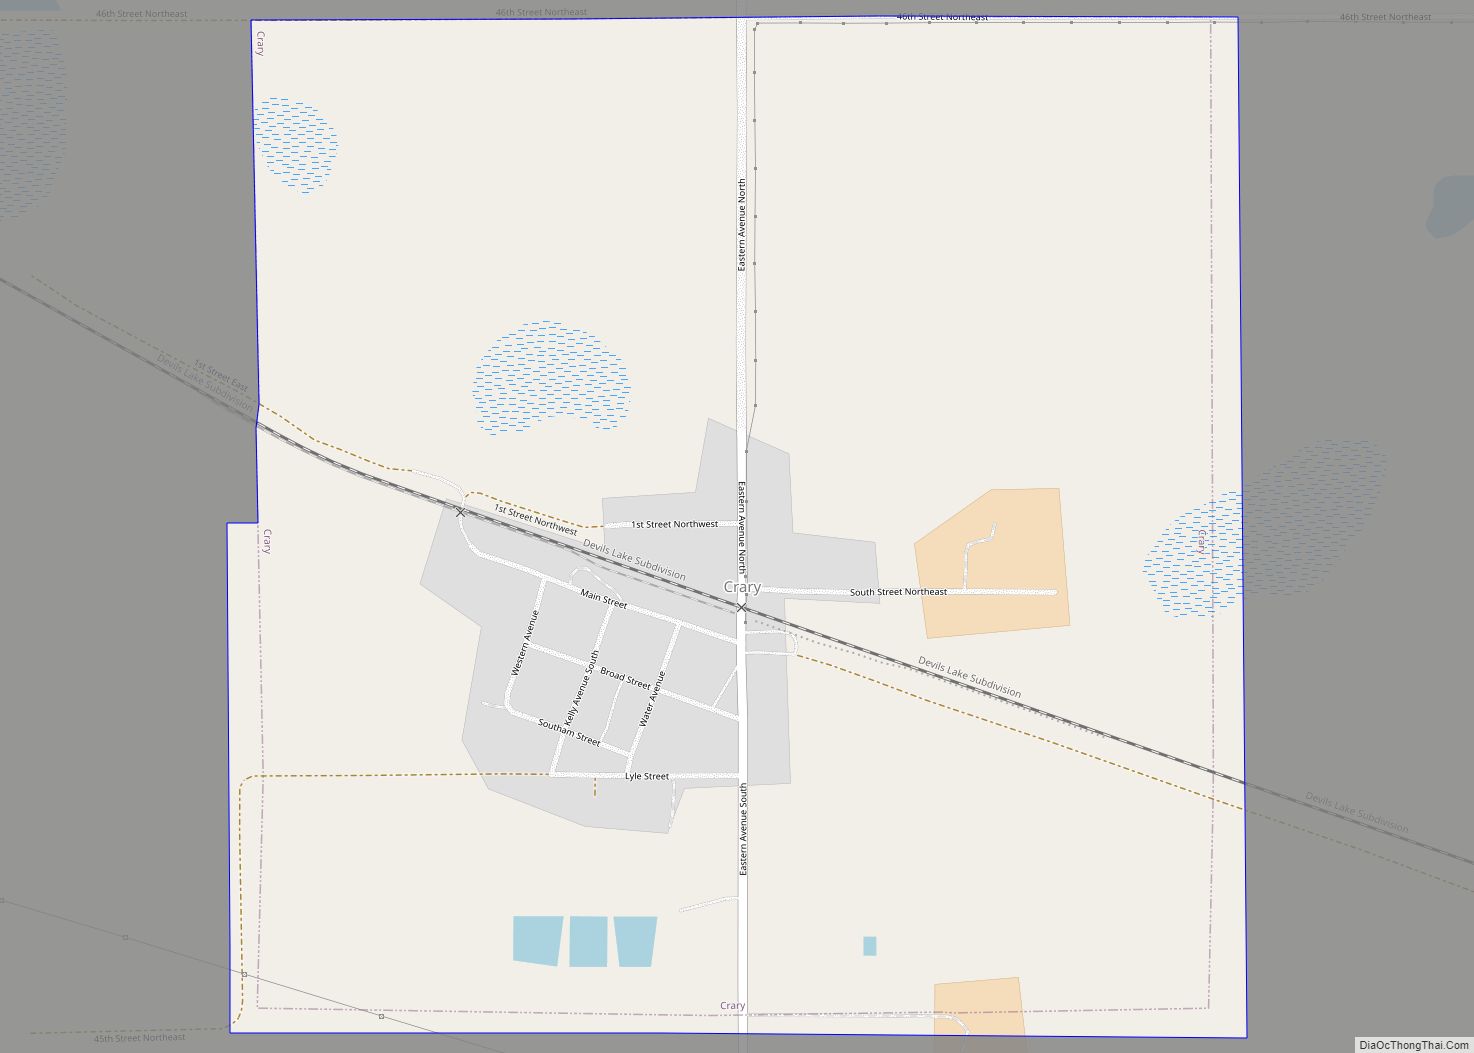 Map of Crary city